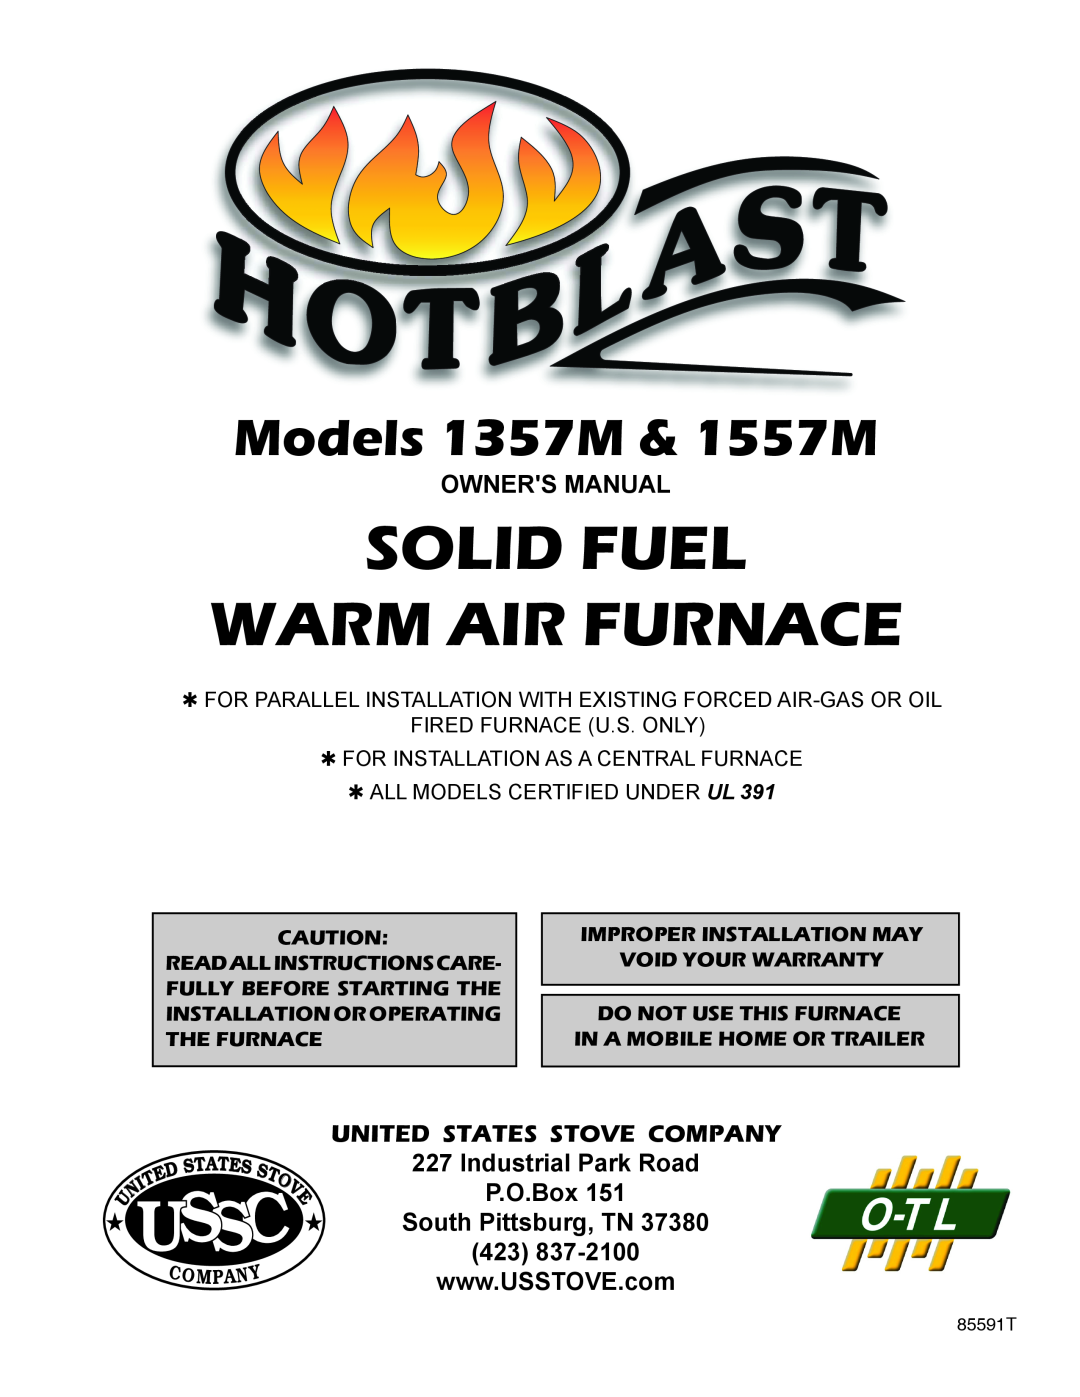 United States Stove owner manual Solid Fuel Warm Air Furnace, Models 1357M & 1557M, Owners Manual, Ussc, T Te, 85591T 